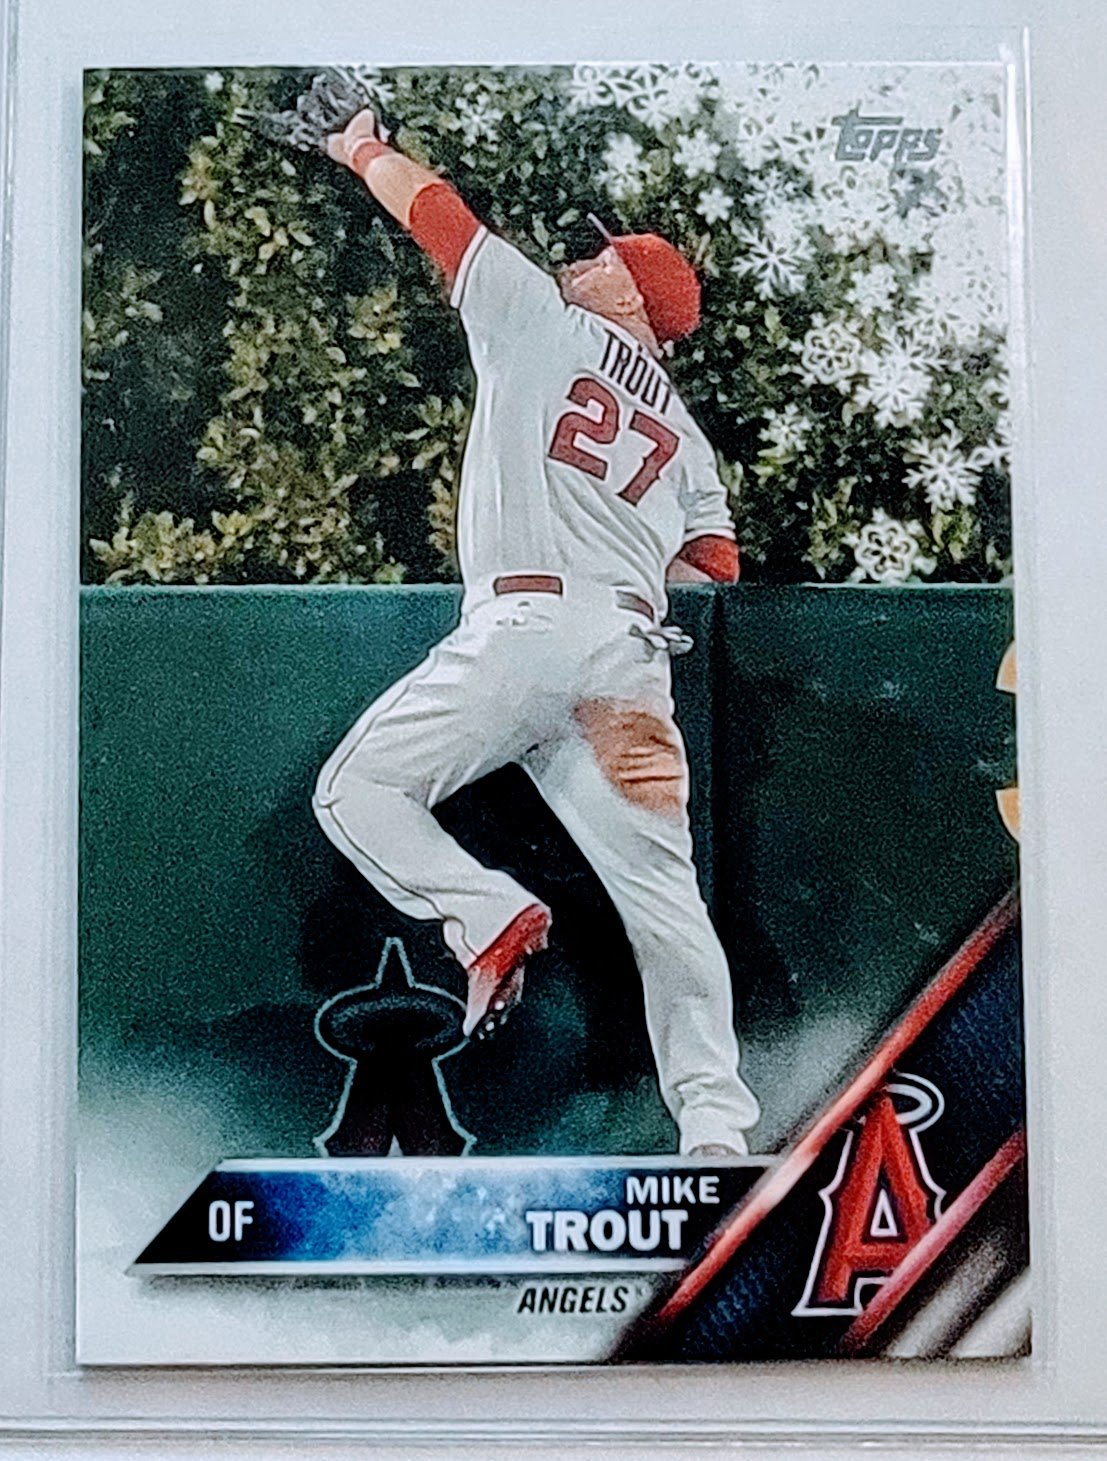 2016 Topps Holiday Mike Trout Baseball Card TPTV simple Xclusive Collectibles   